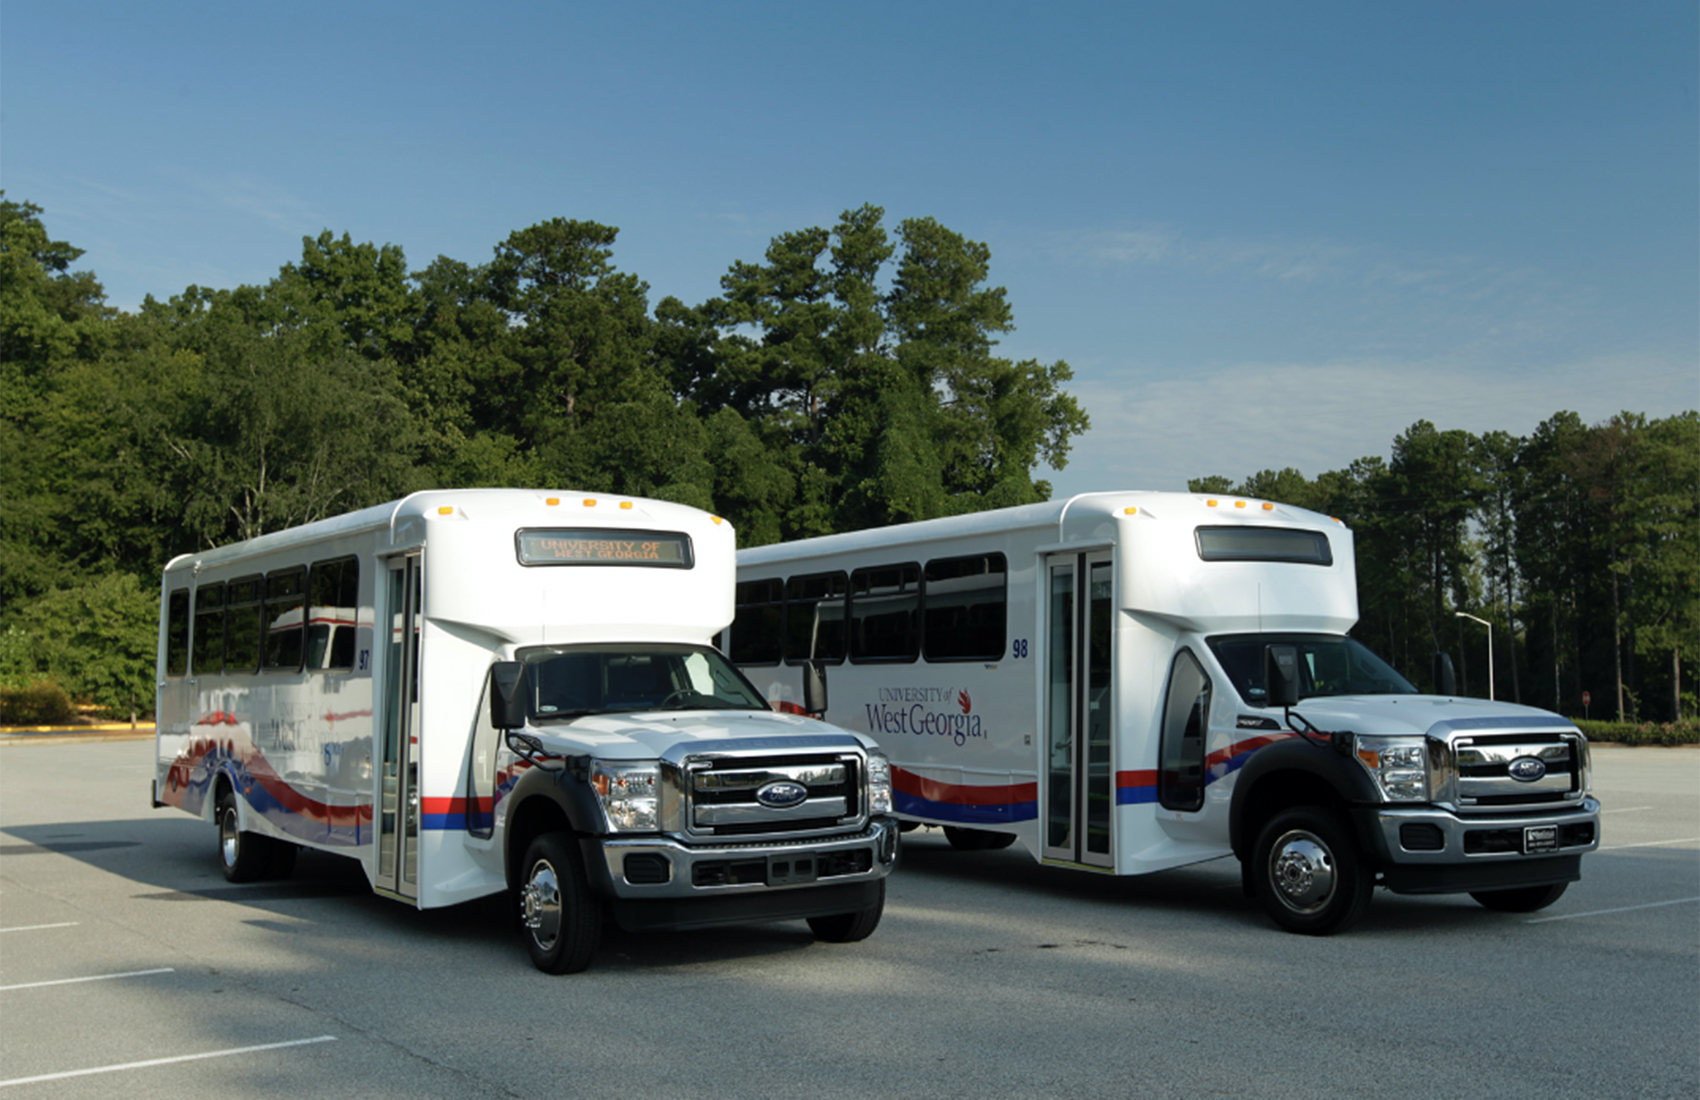 UWG buses parked on the street. 